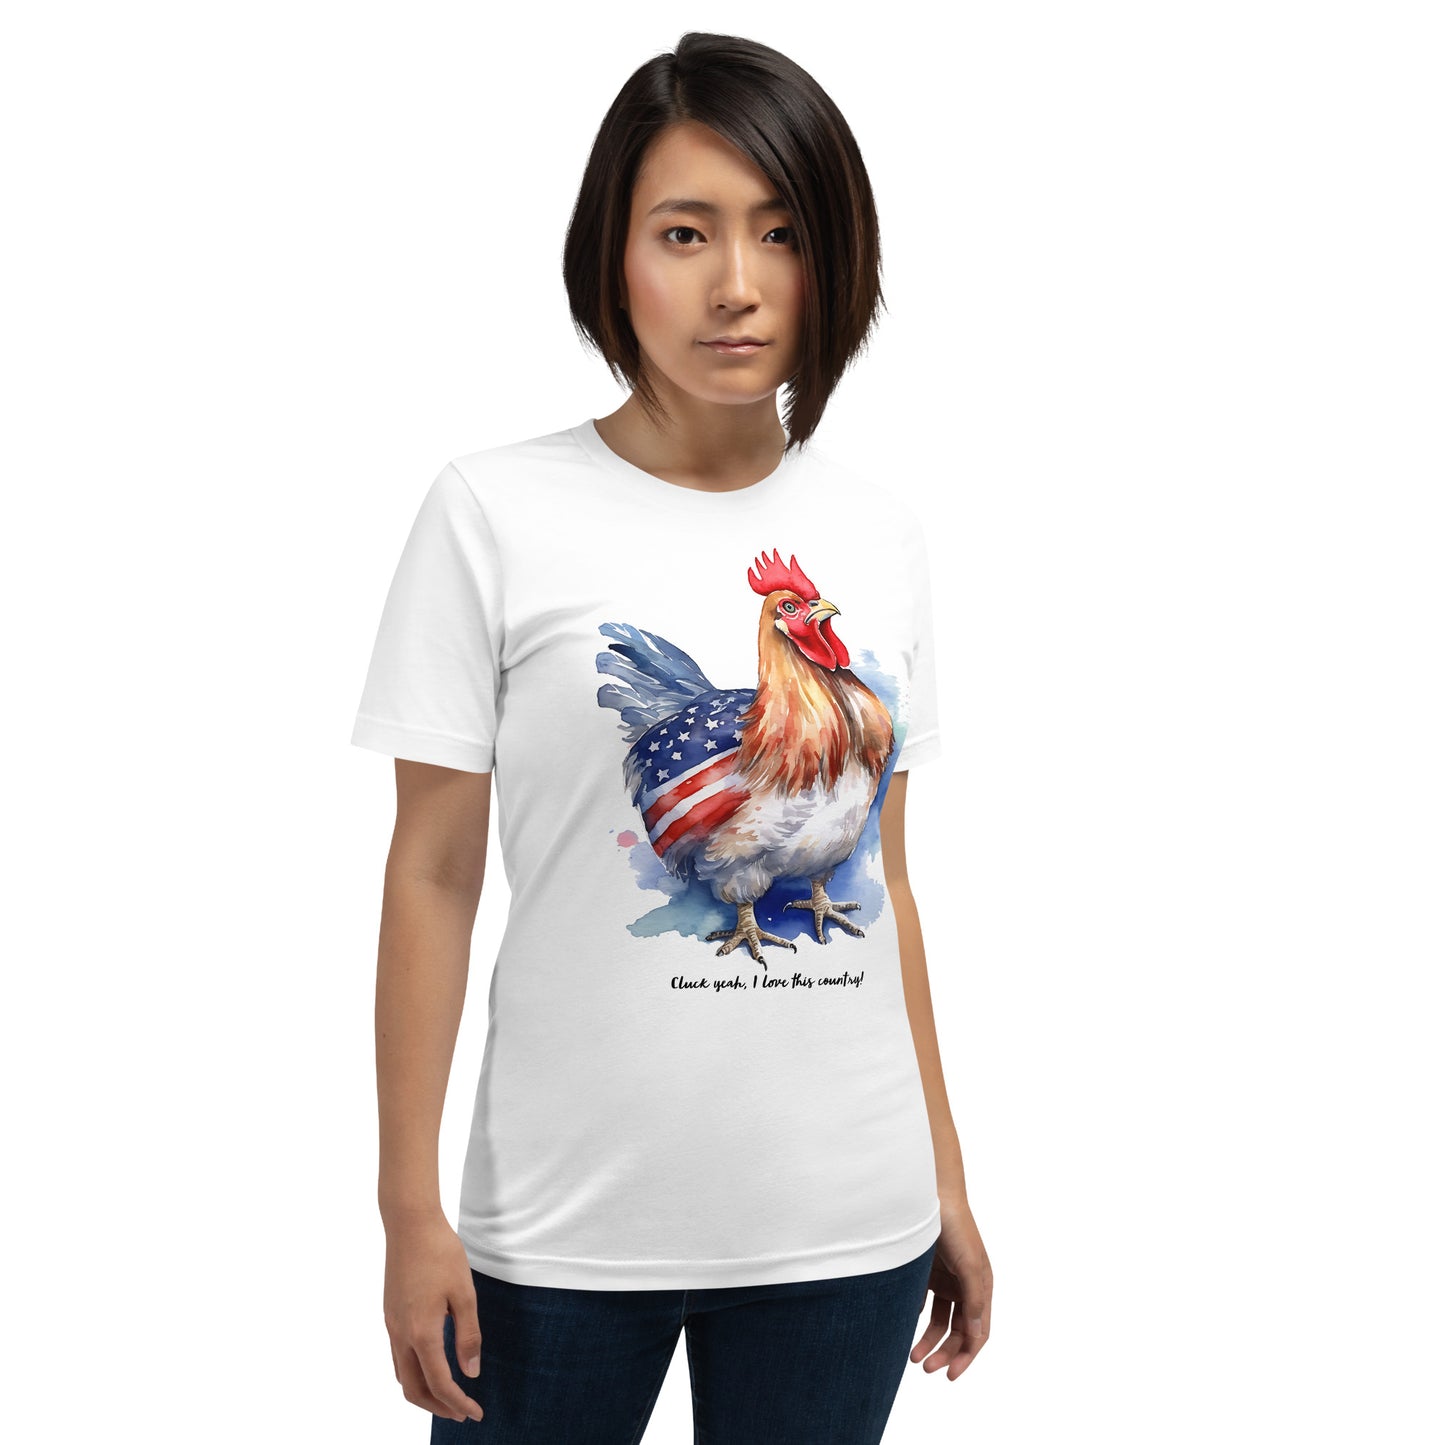 USA Themed Patriotic Chicken Tshirt / Perfect Gift For Chicken Owners / White Color